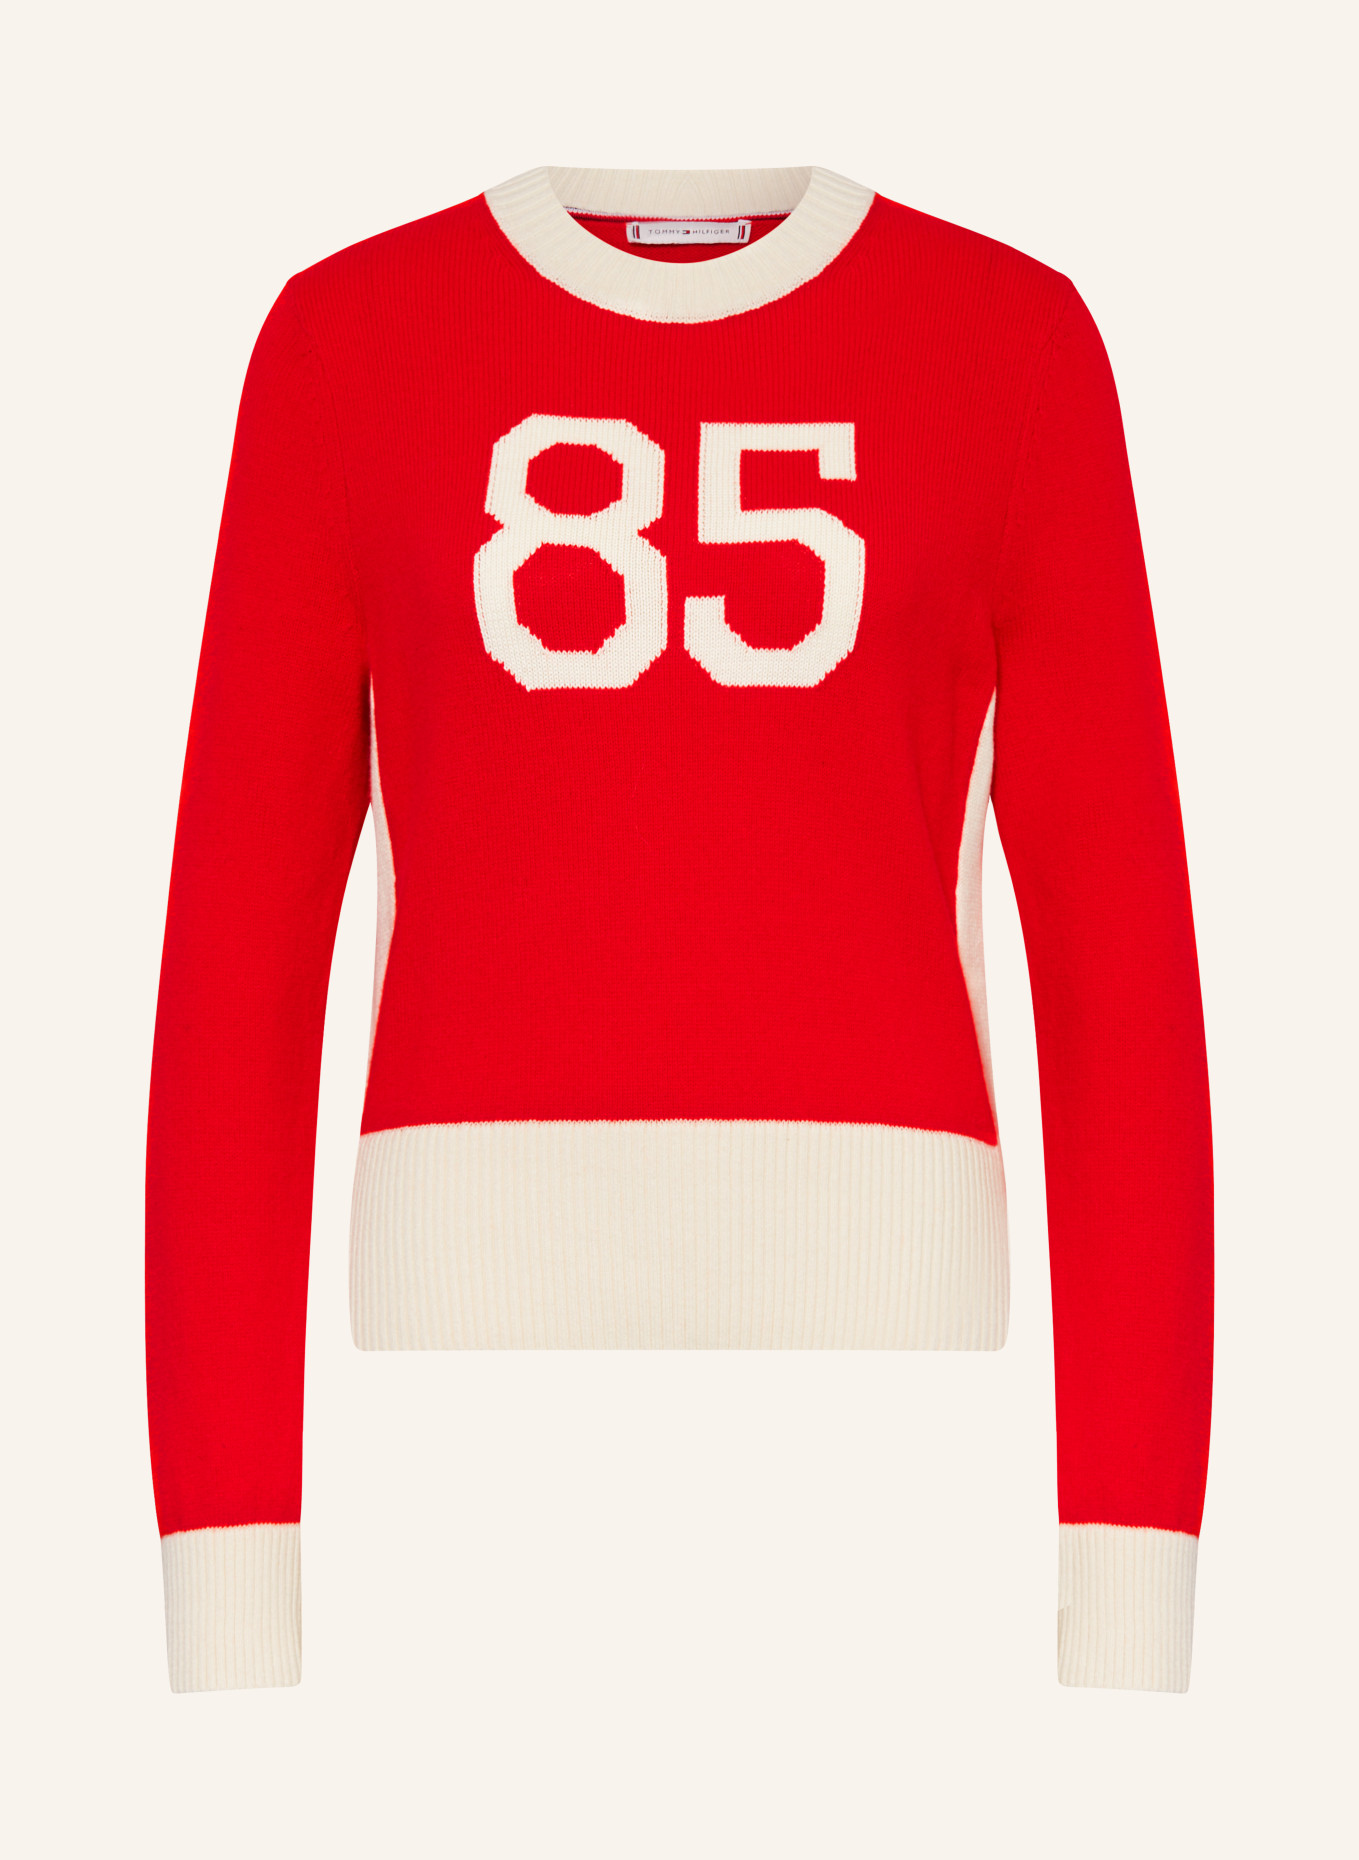 TOMMY HILFIGER Pullover, Farbe: ROT/ CREME (Bild 1)